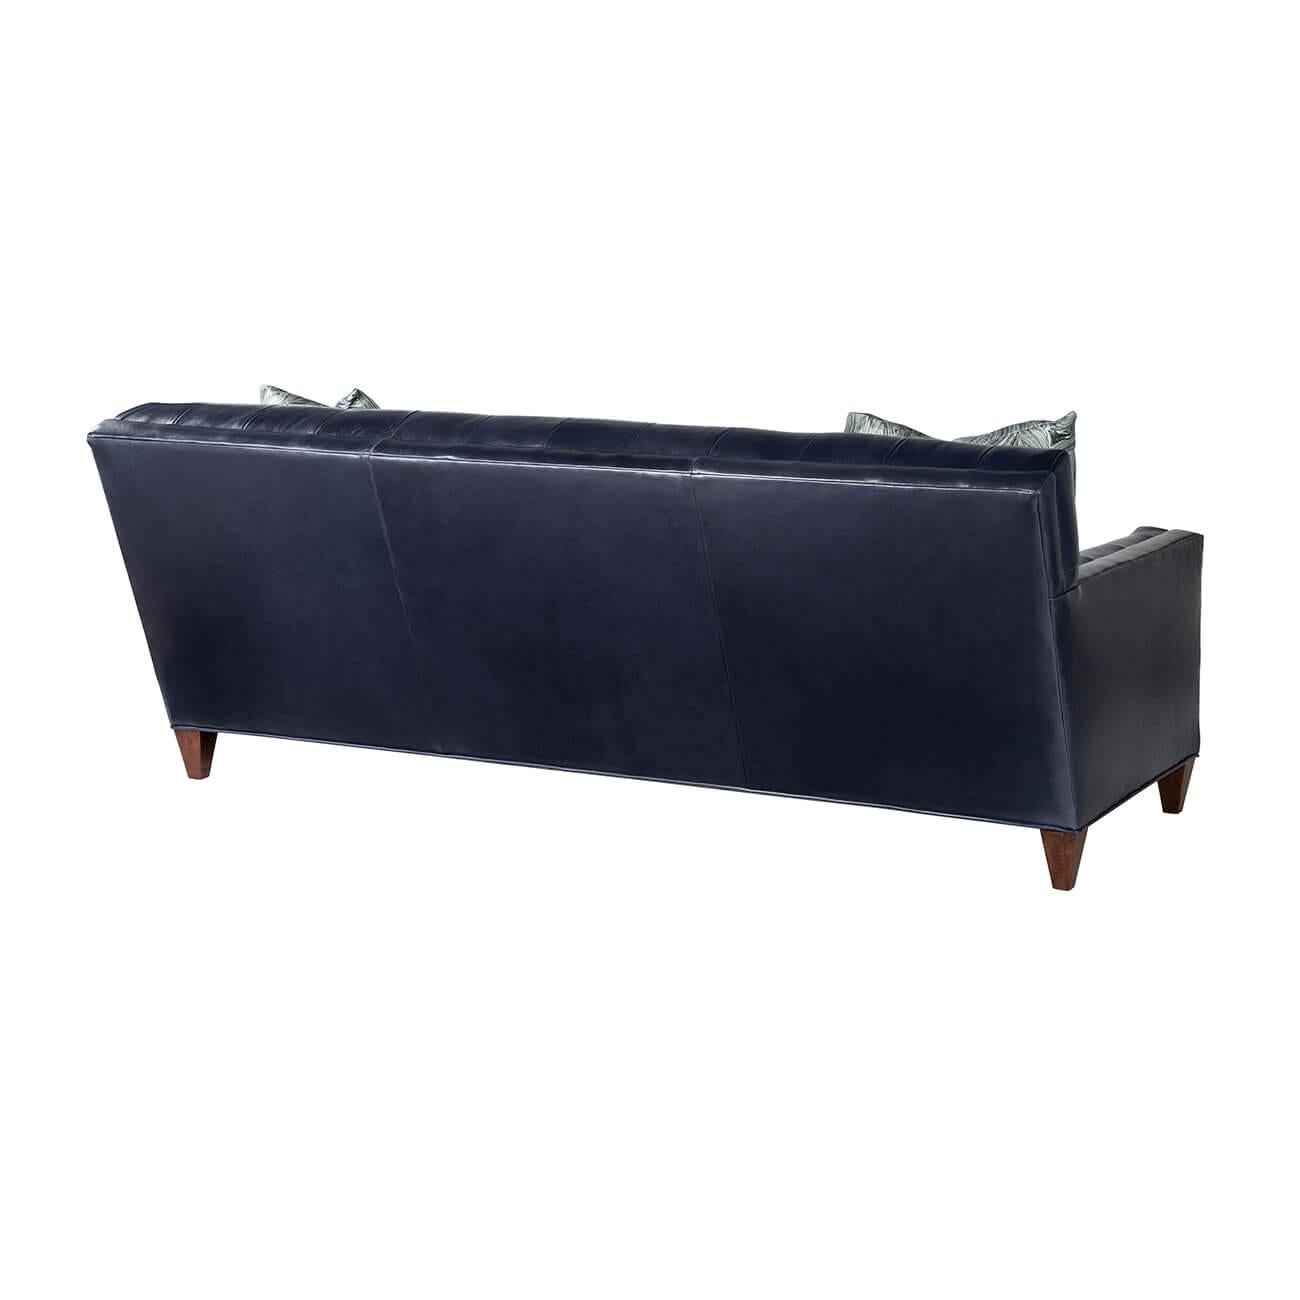 A modern Classic tufted sofa, built with a solid maple frame and constructed with 8-way hand-tied craftsmanship, with a biscuit tufted back and inside arm, with individually cut and sewn panel. Comes with two throw pillows.

COM and other fabrics